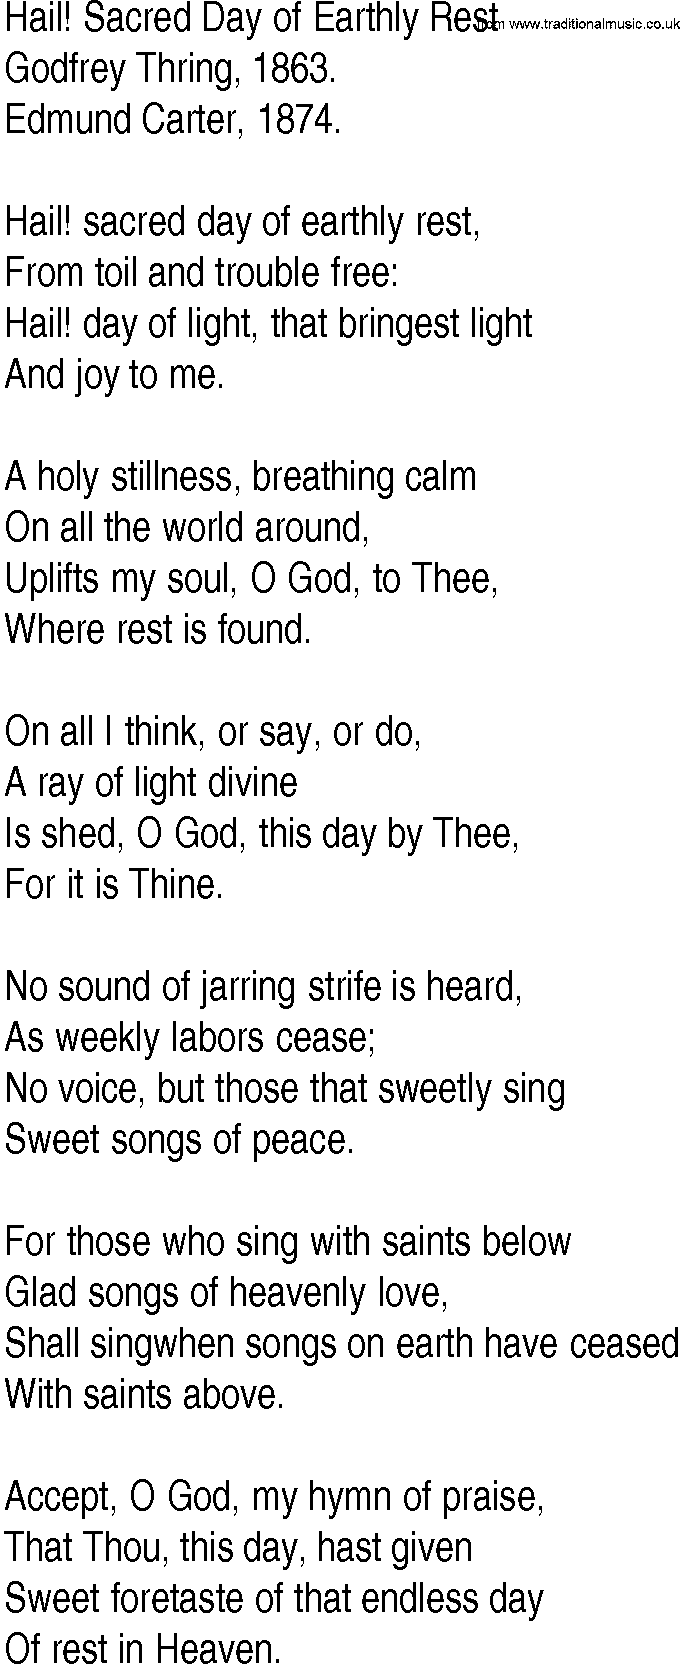 Hymn and Gospel Song: Hail! Sacred Day of Earthly Rest by Godfrey Thring lyrics